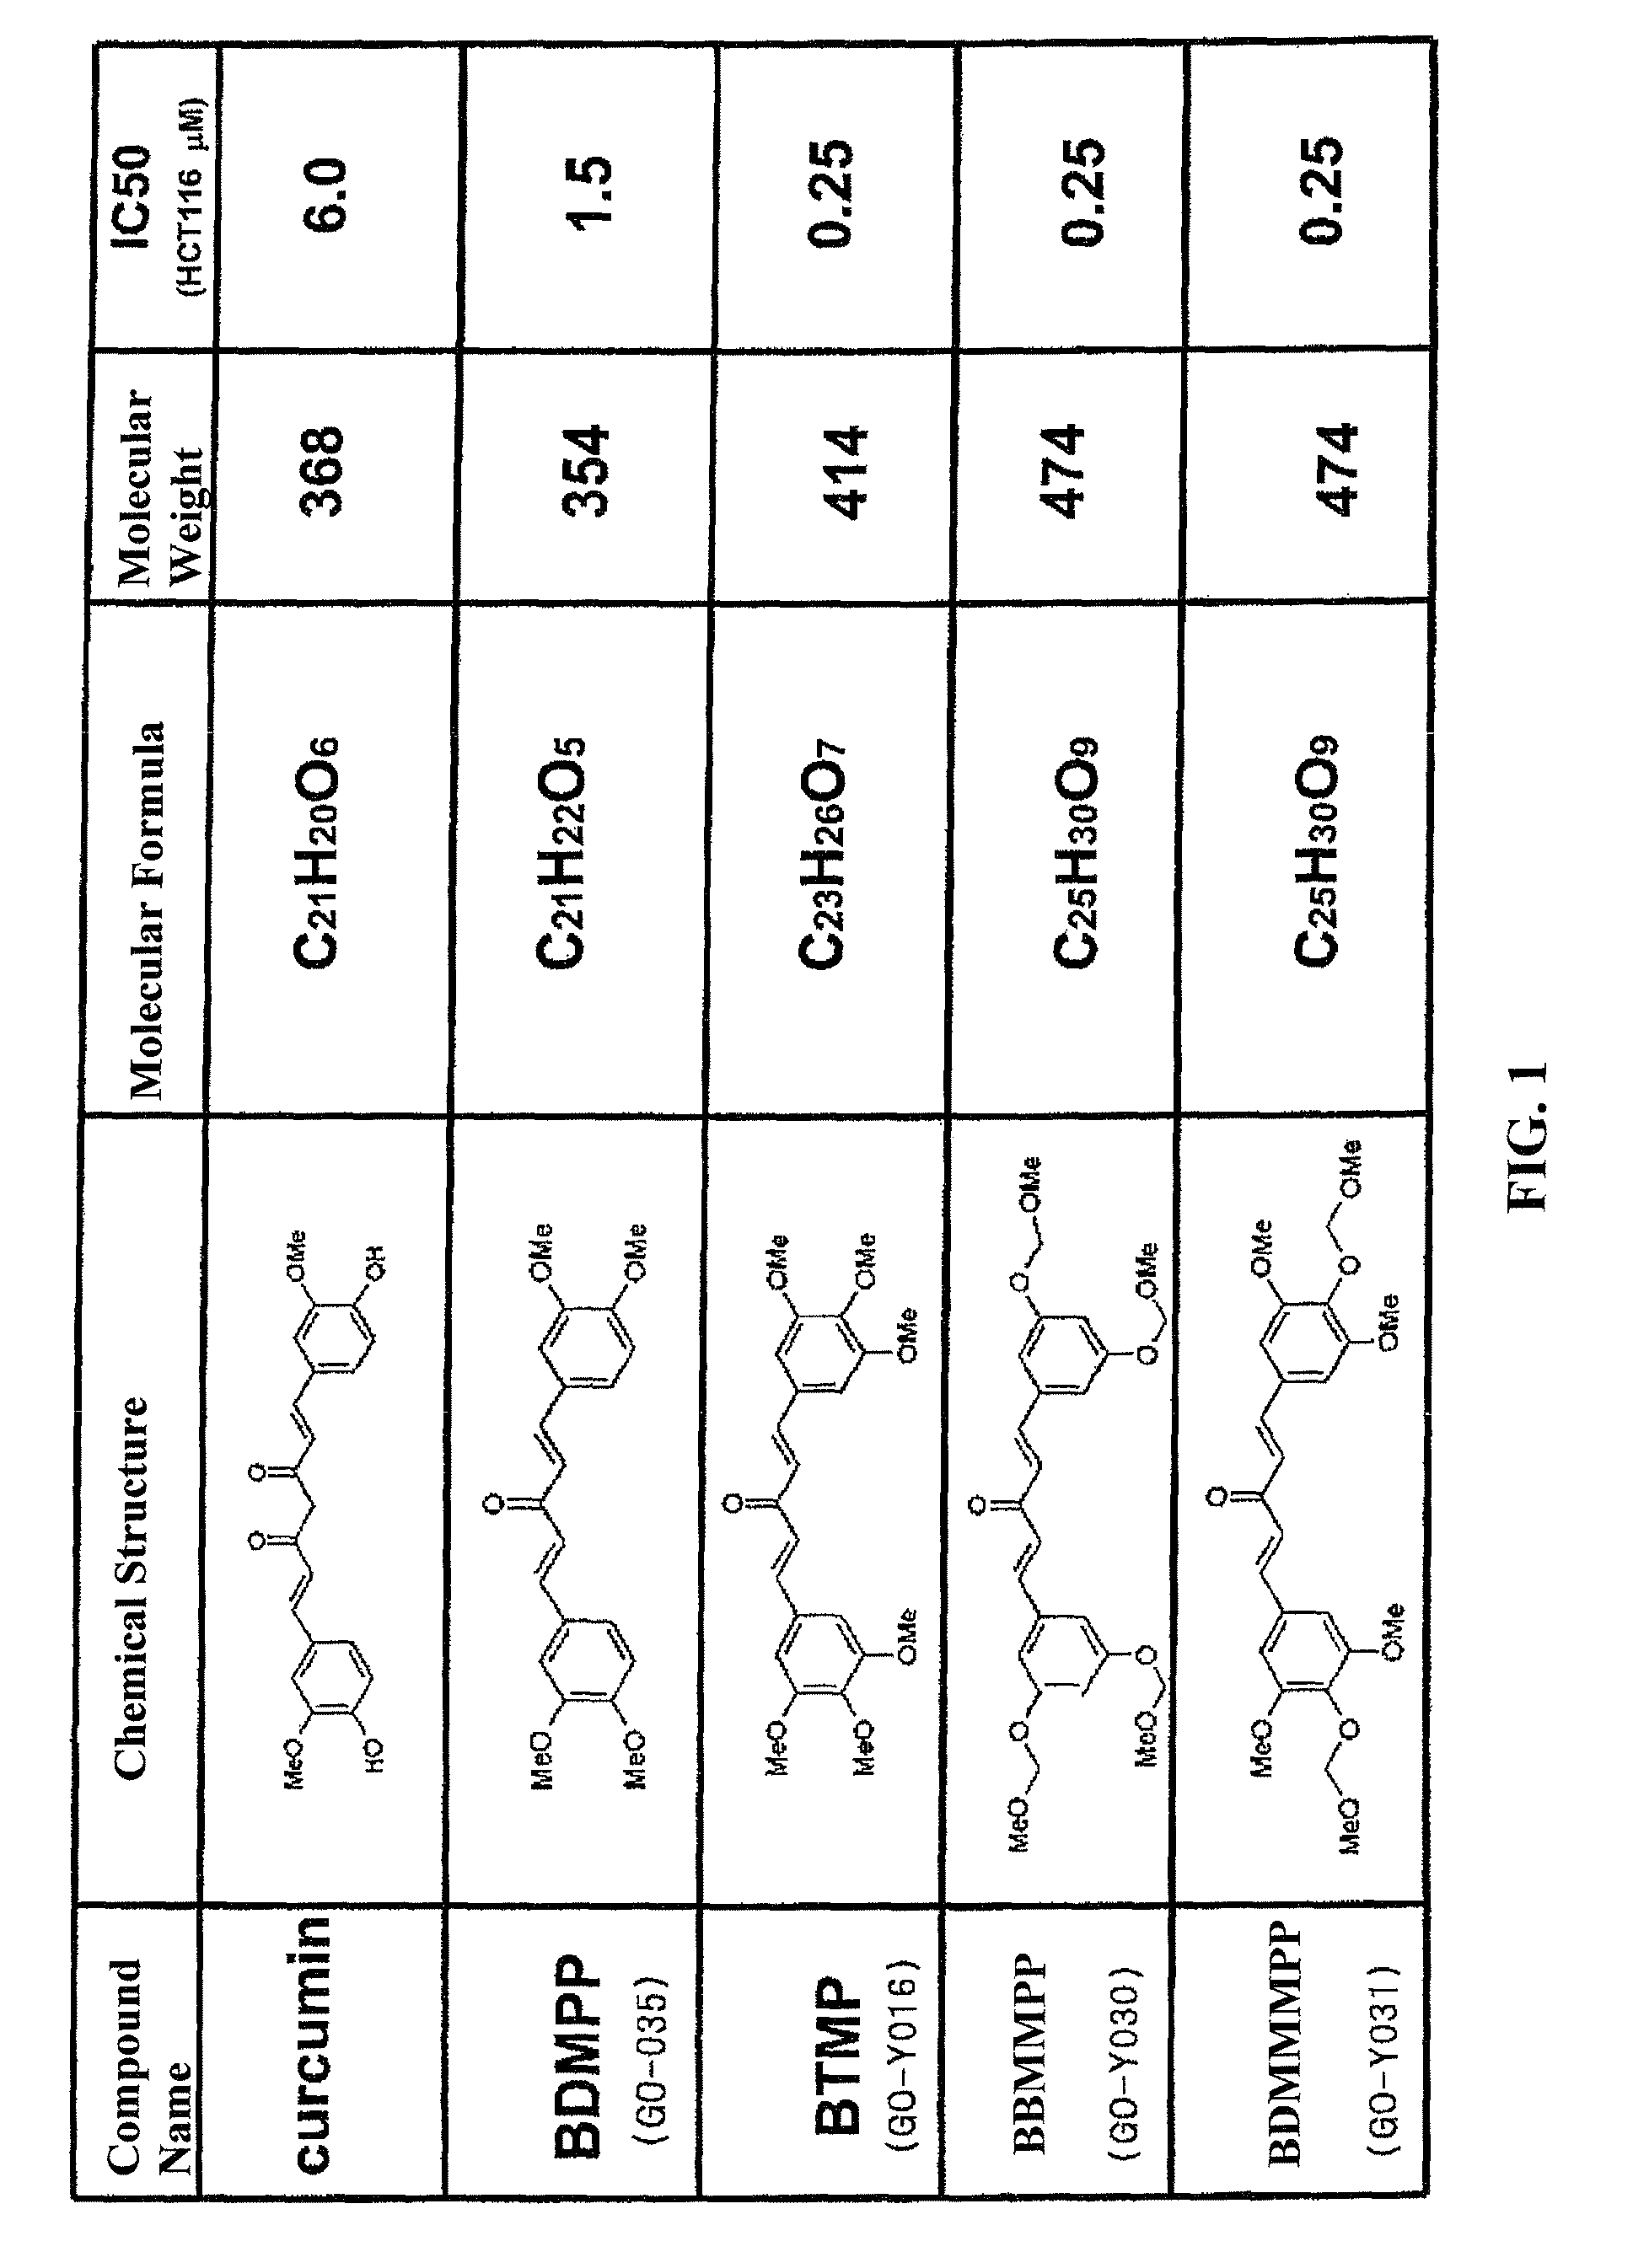 Bis(arylmethylidene)acetone compound, anti-cancer agent, carcinogenesis-preventive agent, inhibitor of expression of Ki-Ras, ErbB2, c-Myc and Cycline D1, β-catenin-degrading agent, and p53 expression enhancer